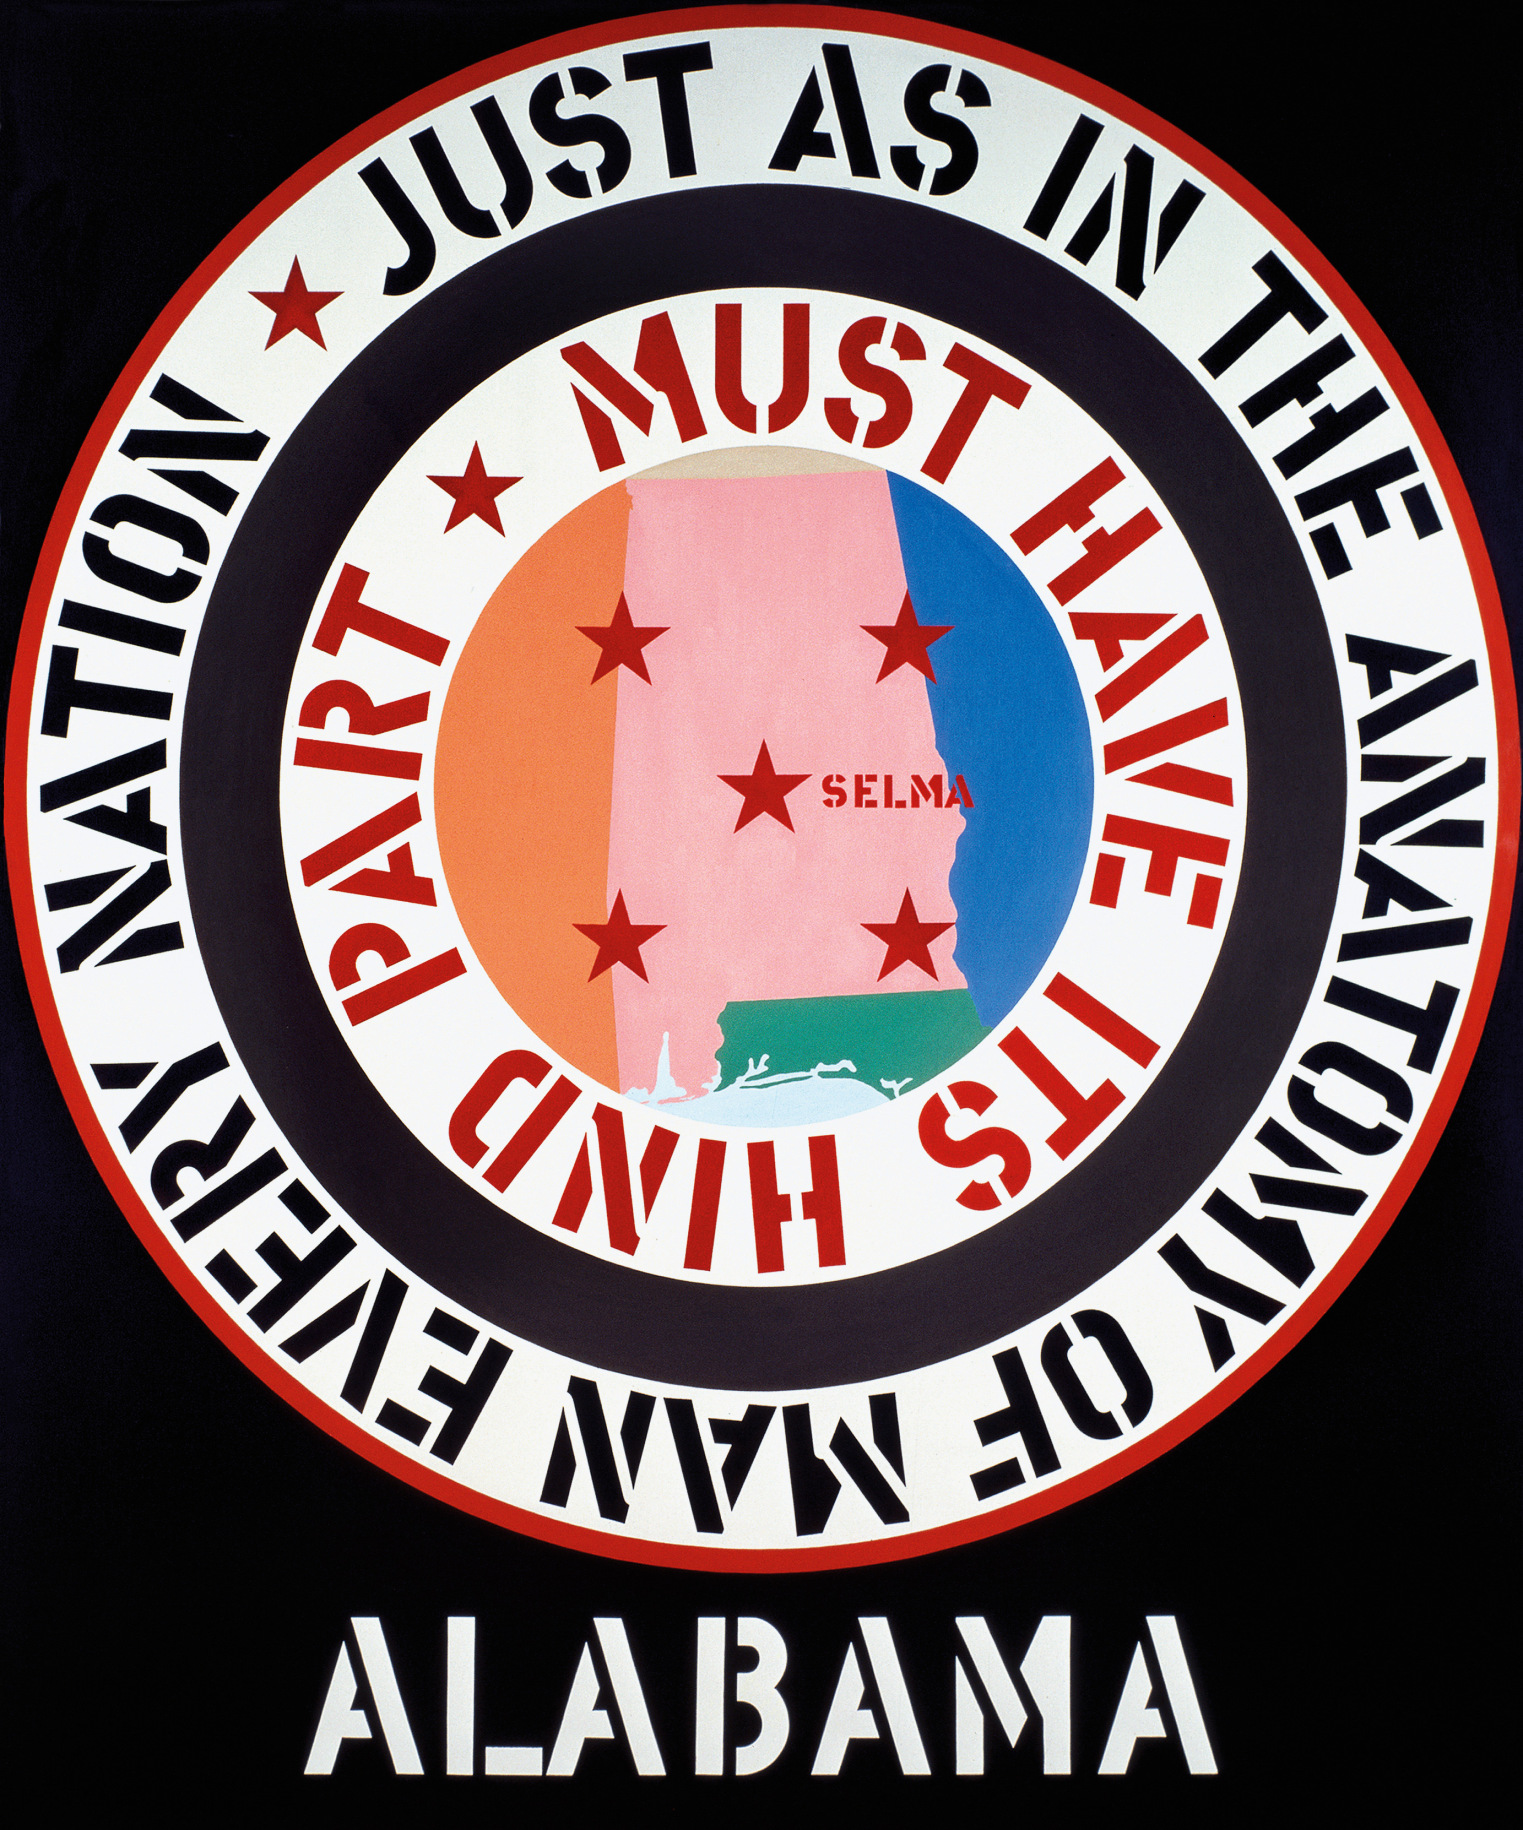 A 70 by 60 inch black canvas with the title, Alabama, painted in white stenciled letters across the center bottom edge of the painting. Above the title and dominating the canvas is a large circle consisting of a pink image of the state of Alabama, with Selma shown on the map. Around this image is a white ring with stenciled red text surrounded by a black ring and another white ring with black stenciled text. The text reads, starting in the outer ring, &quot;Just as in the anatomy of man every nation,&quot; and in the inner ring &quot;must have its hind part.&quot;